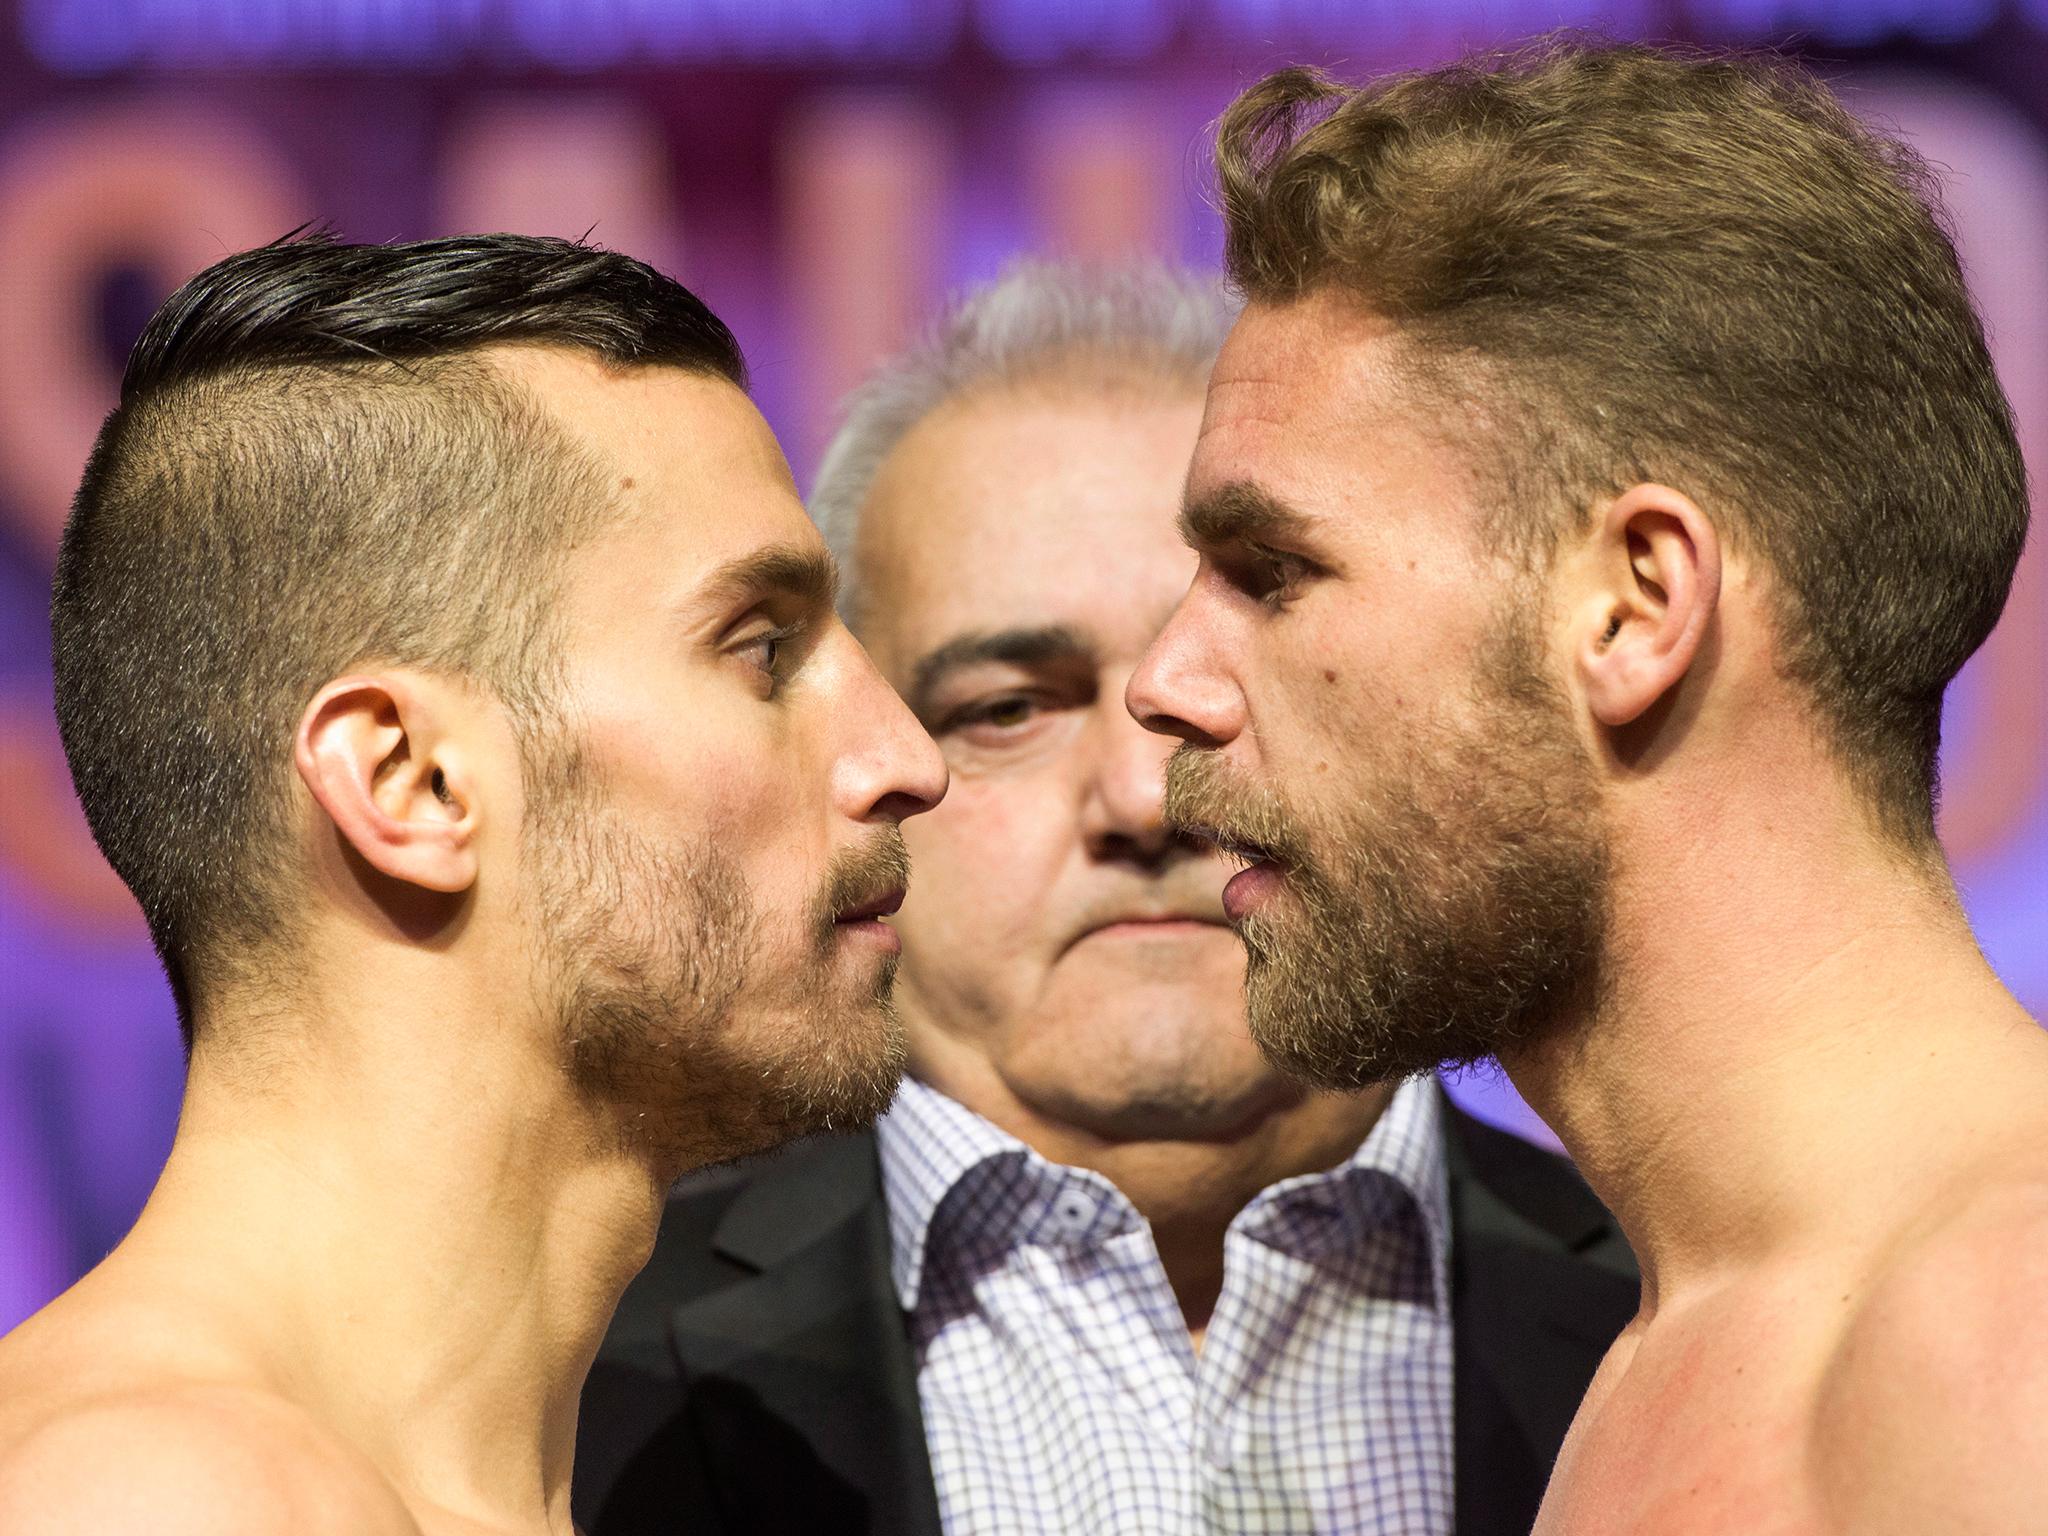 Billy Joe Saunders (right) is the slight favourite against David Lemieux on Saturday night